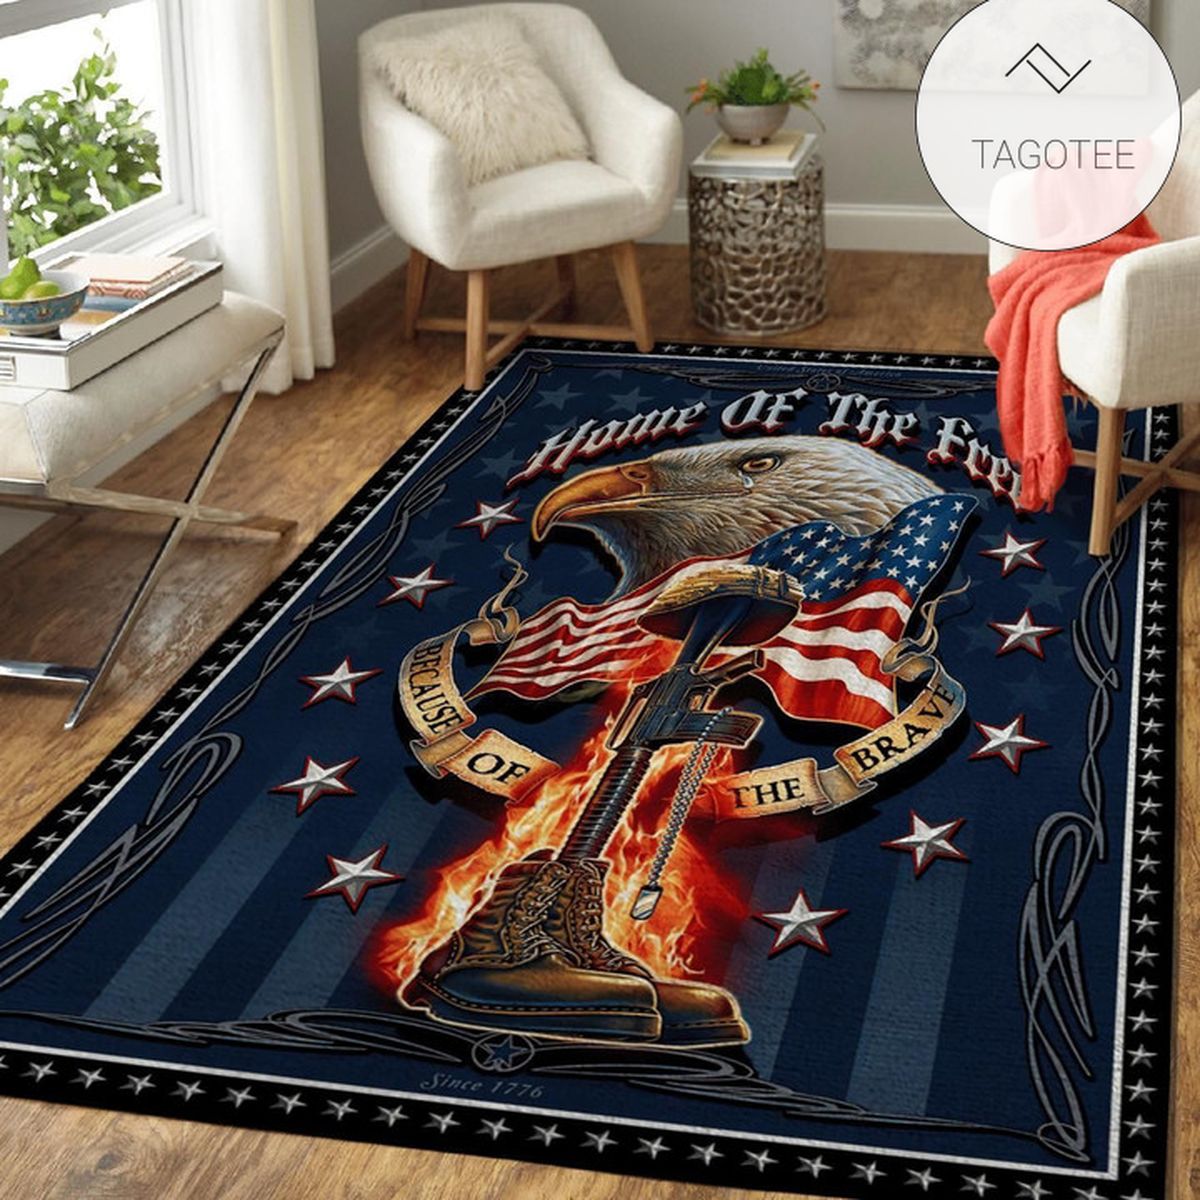 Eagle Giving Family Home Of The Free Area Rug